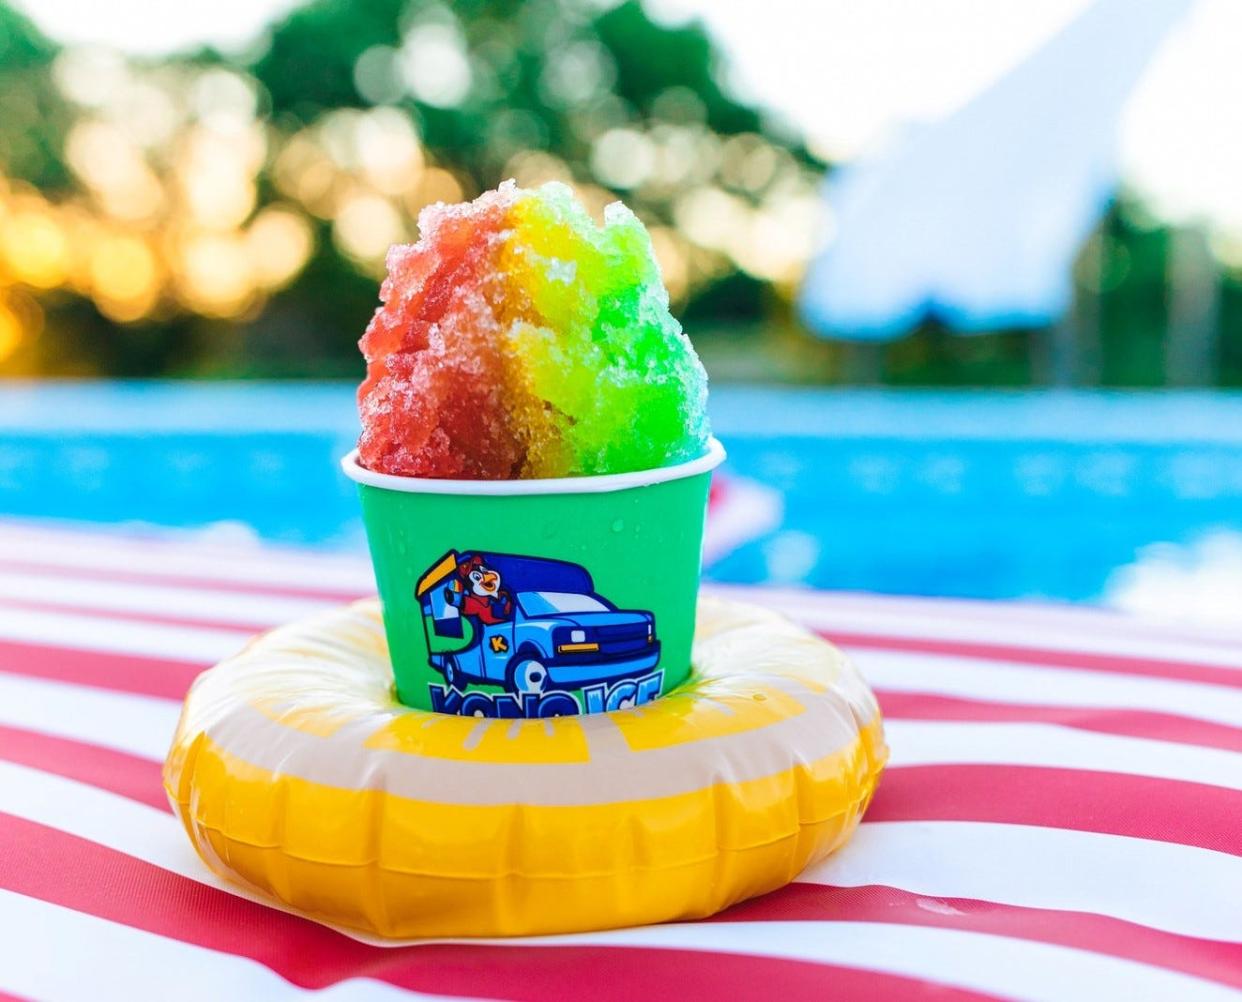 A frozen treat from the Kona Ice food truck